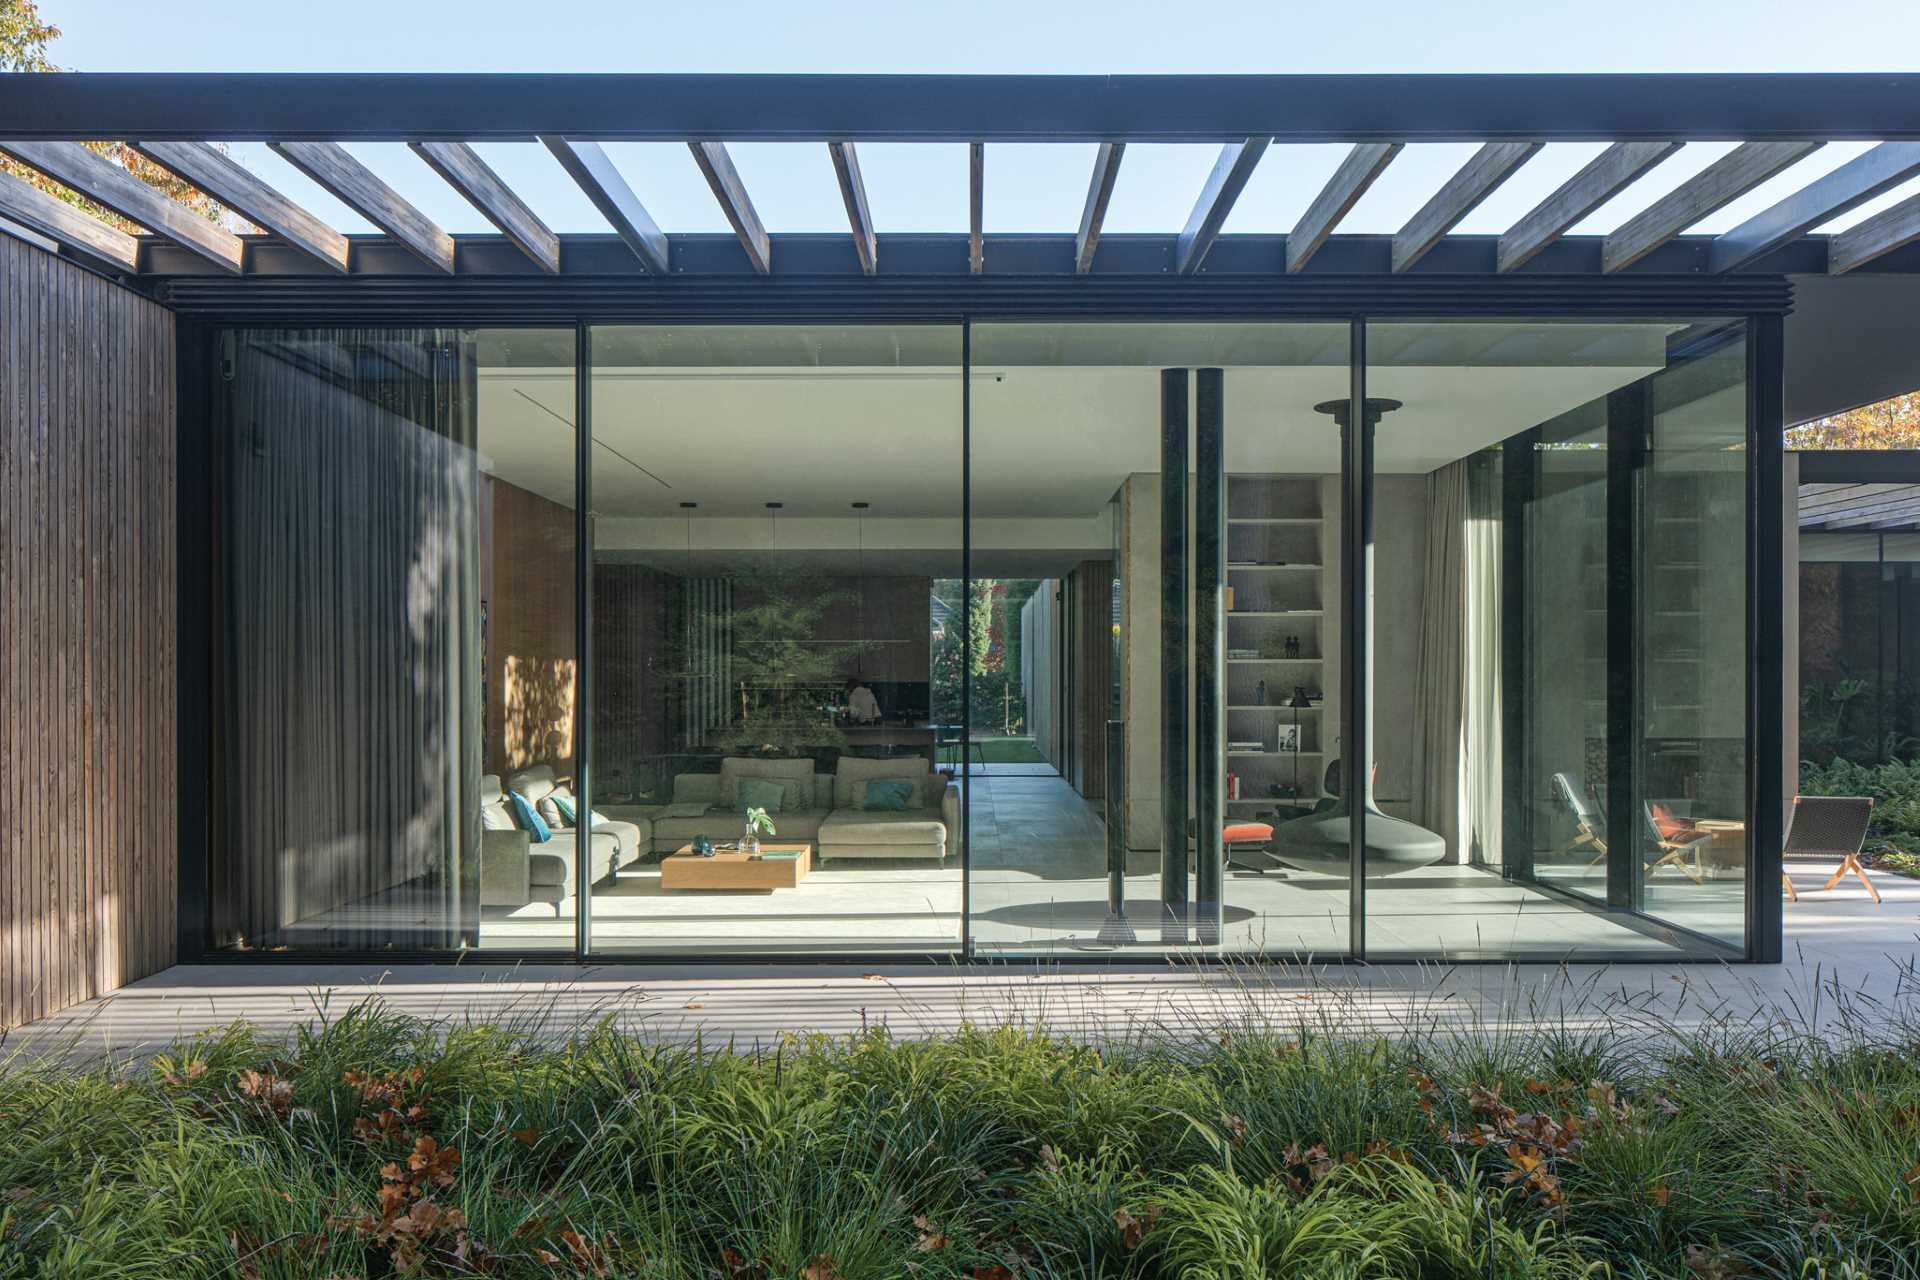 On the side of this home that faces the forest, where the setting is more intimate, the boundary between interior and exterior is blurred with glass panels.